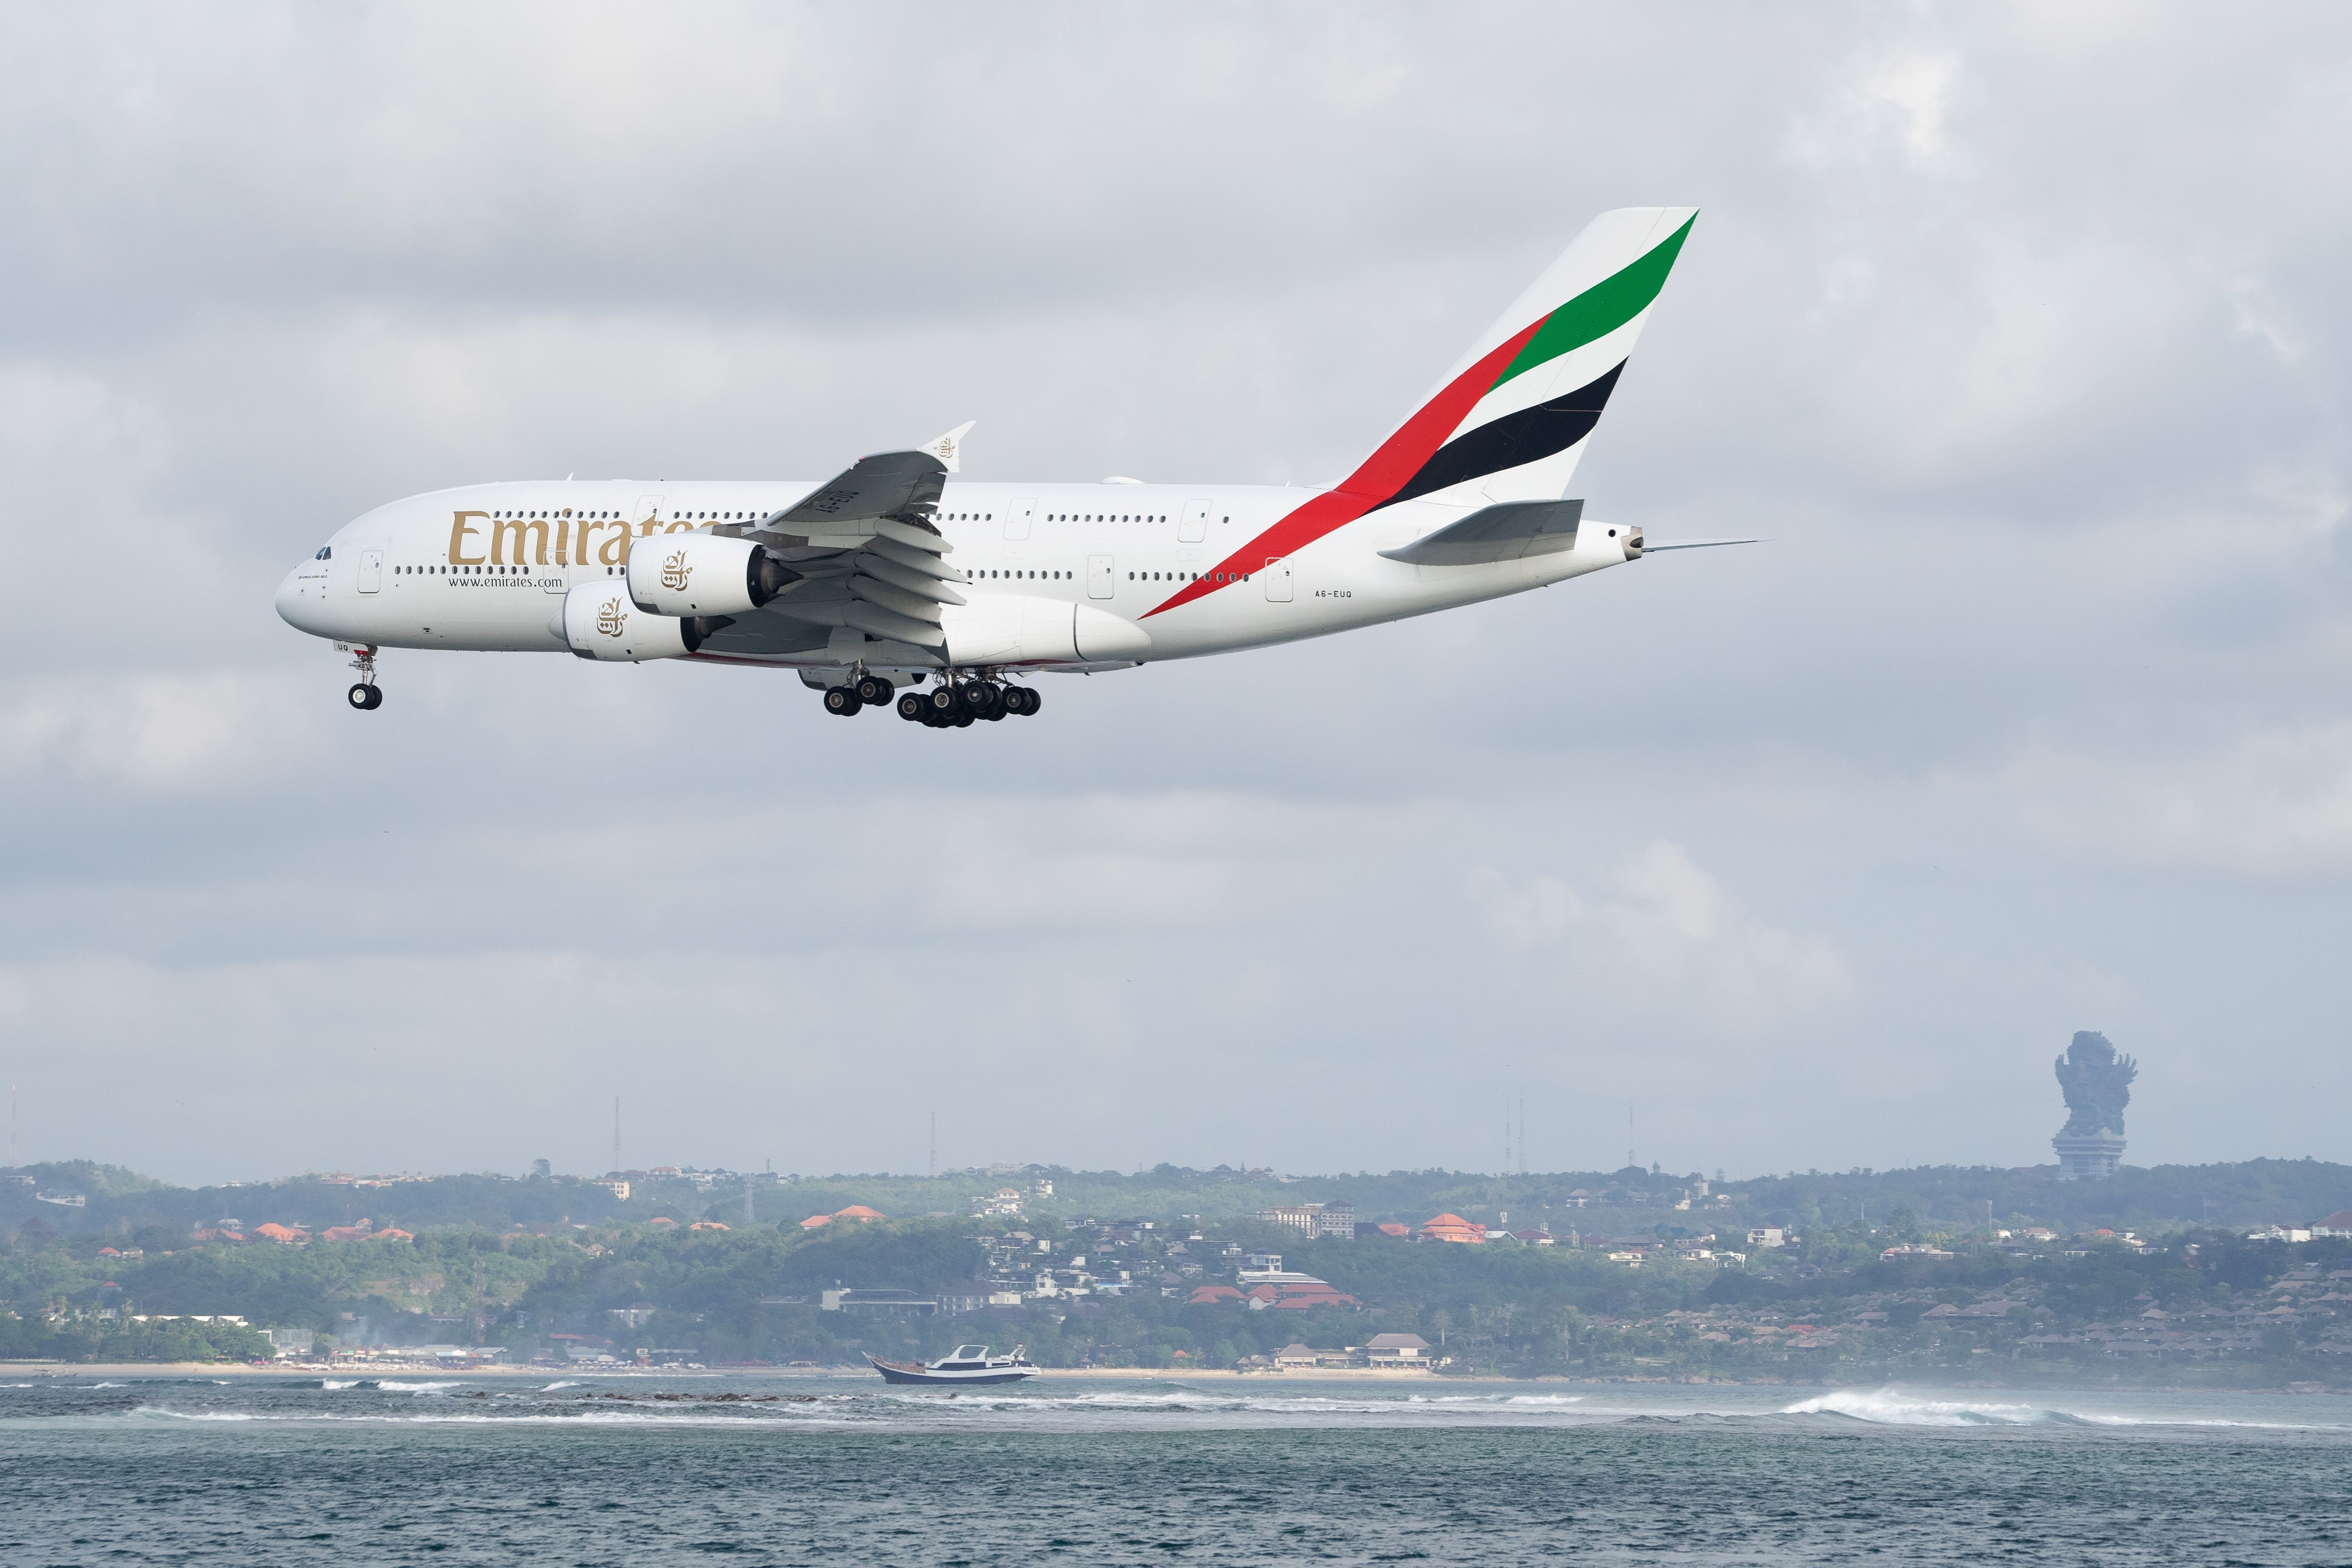 An Emirates Airbus A380 about to land at Denpasar International Airport.